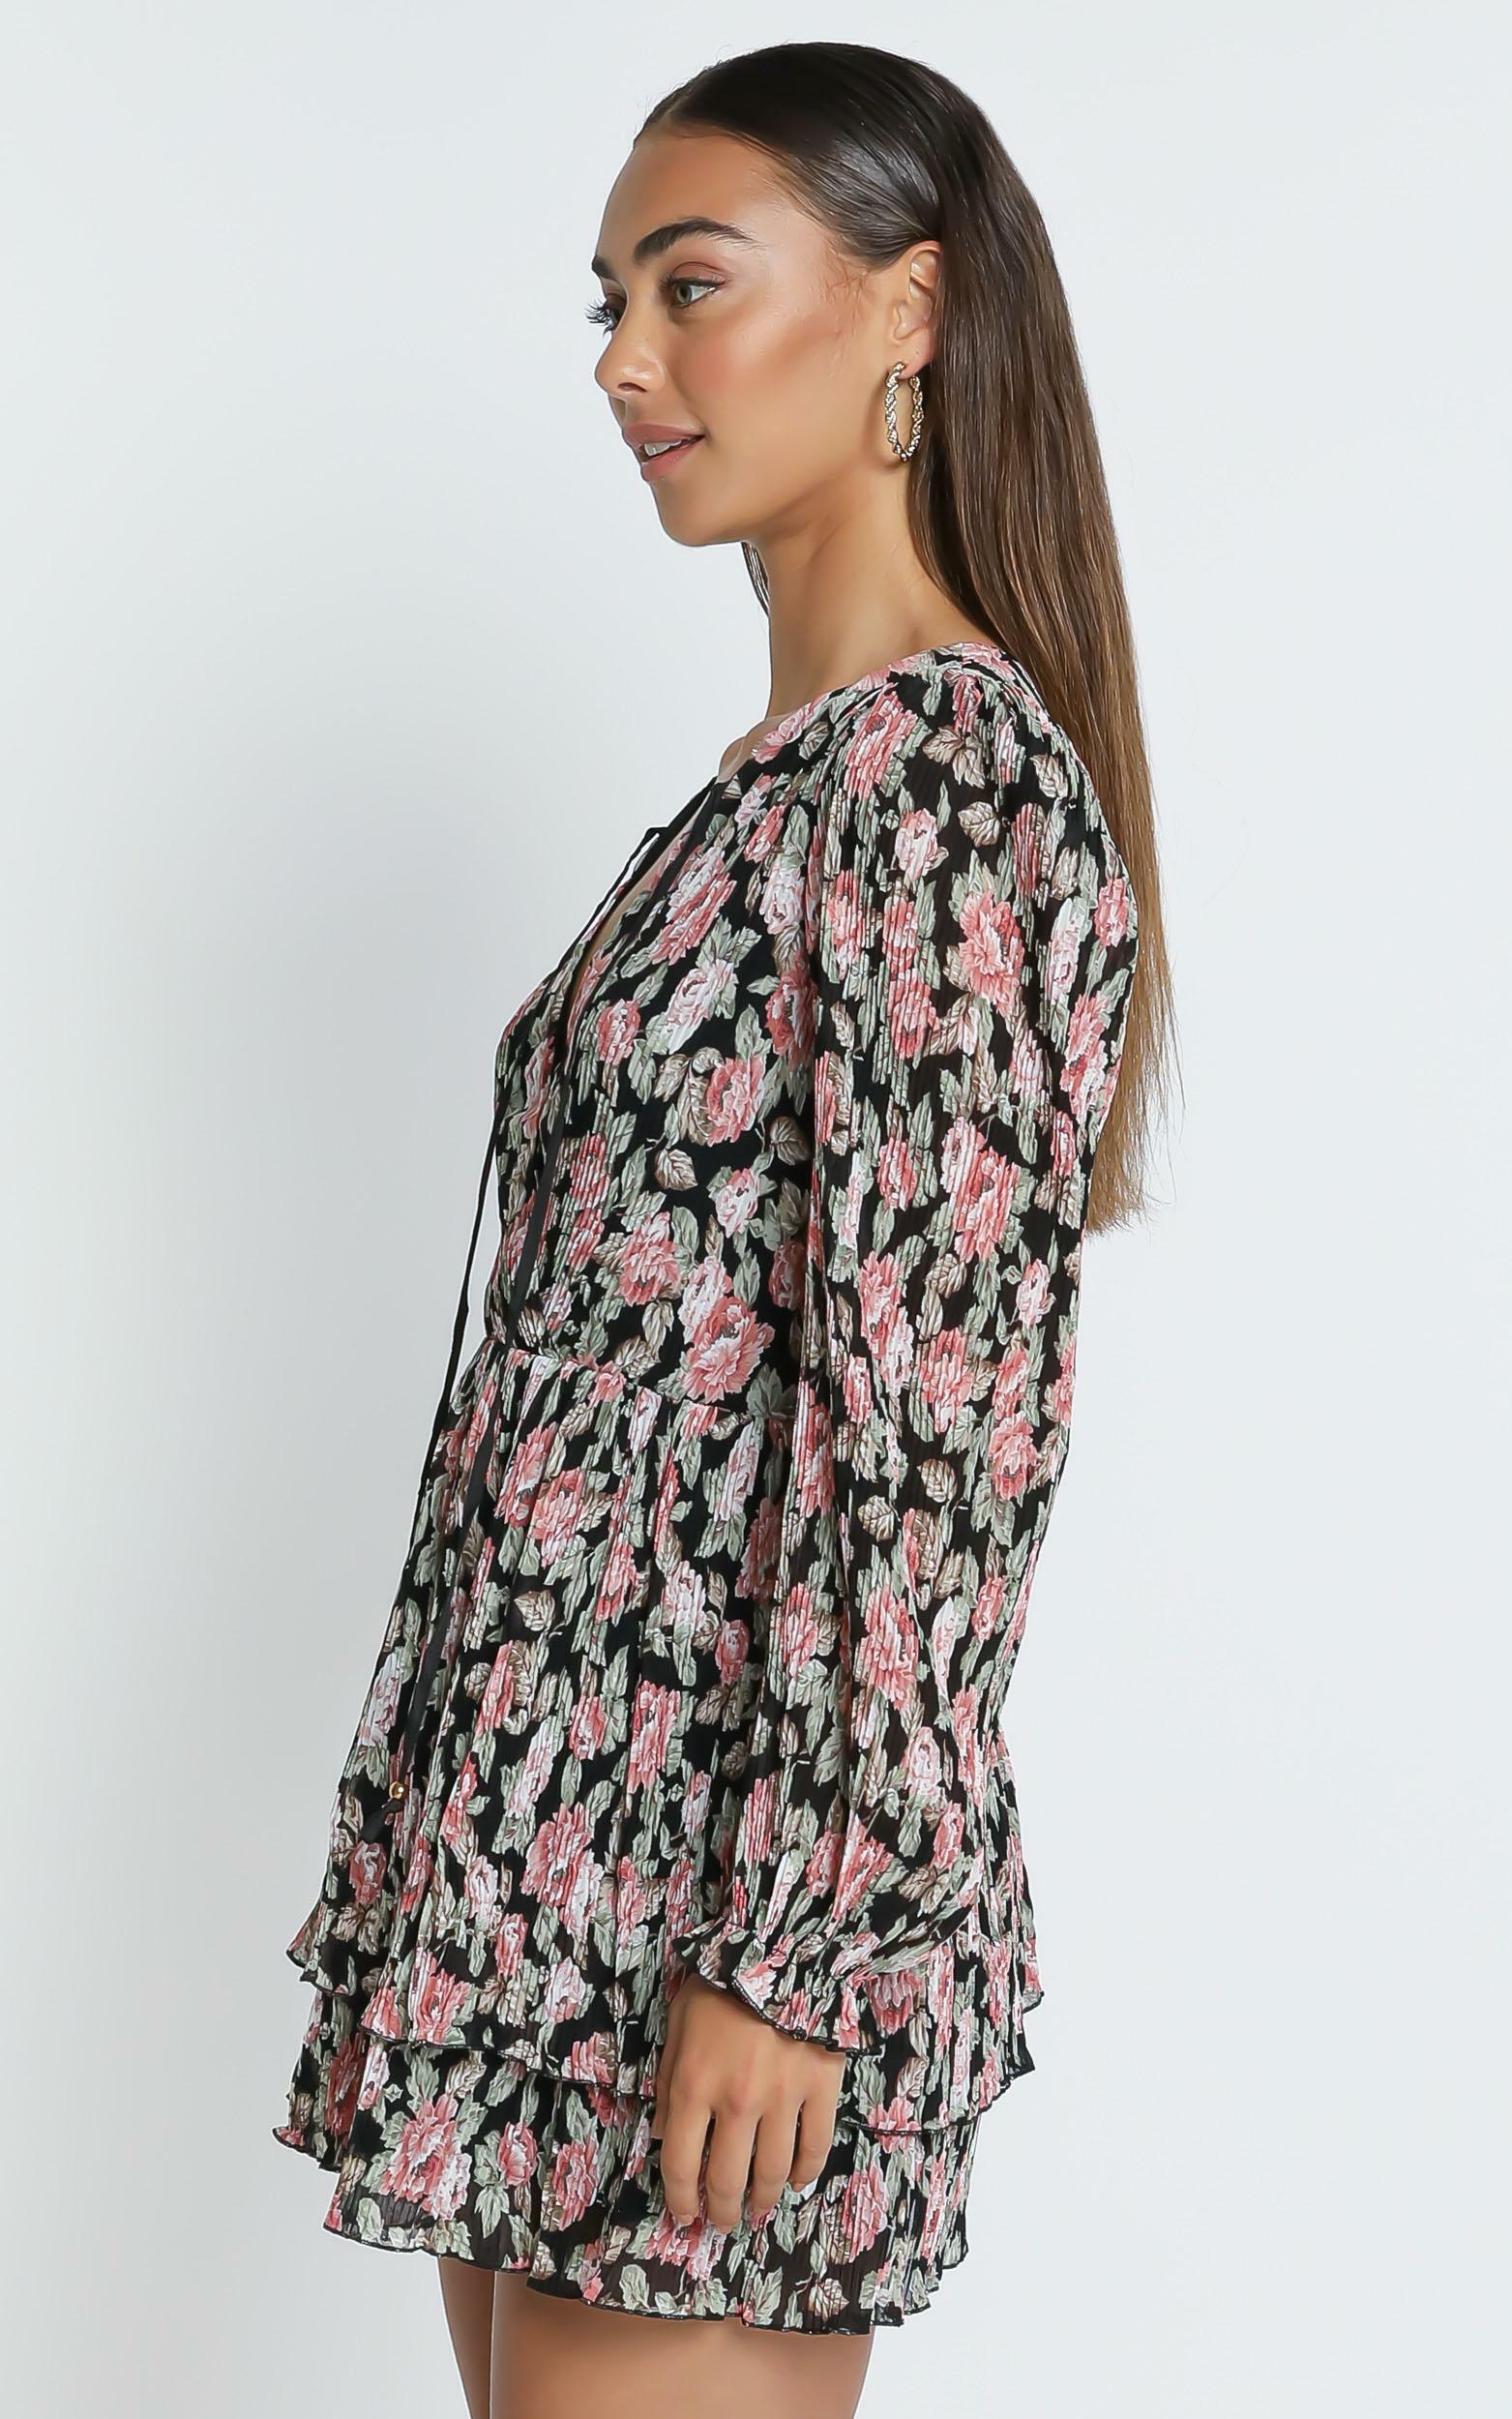 Eloise Long Sleeve Mini Dress in Pleated Rose Floral